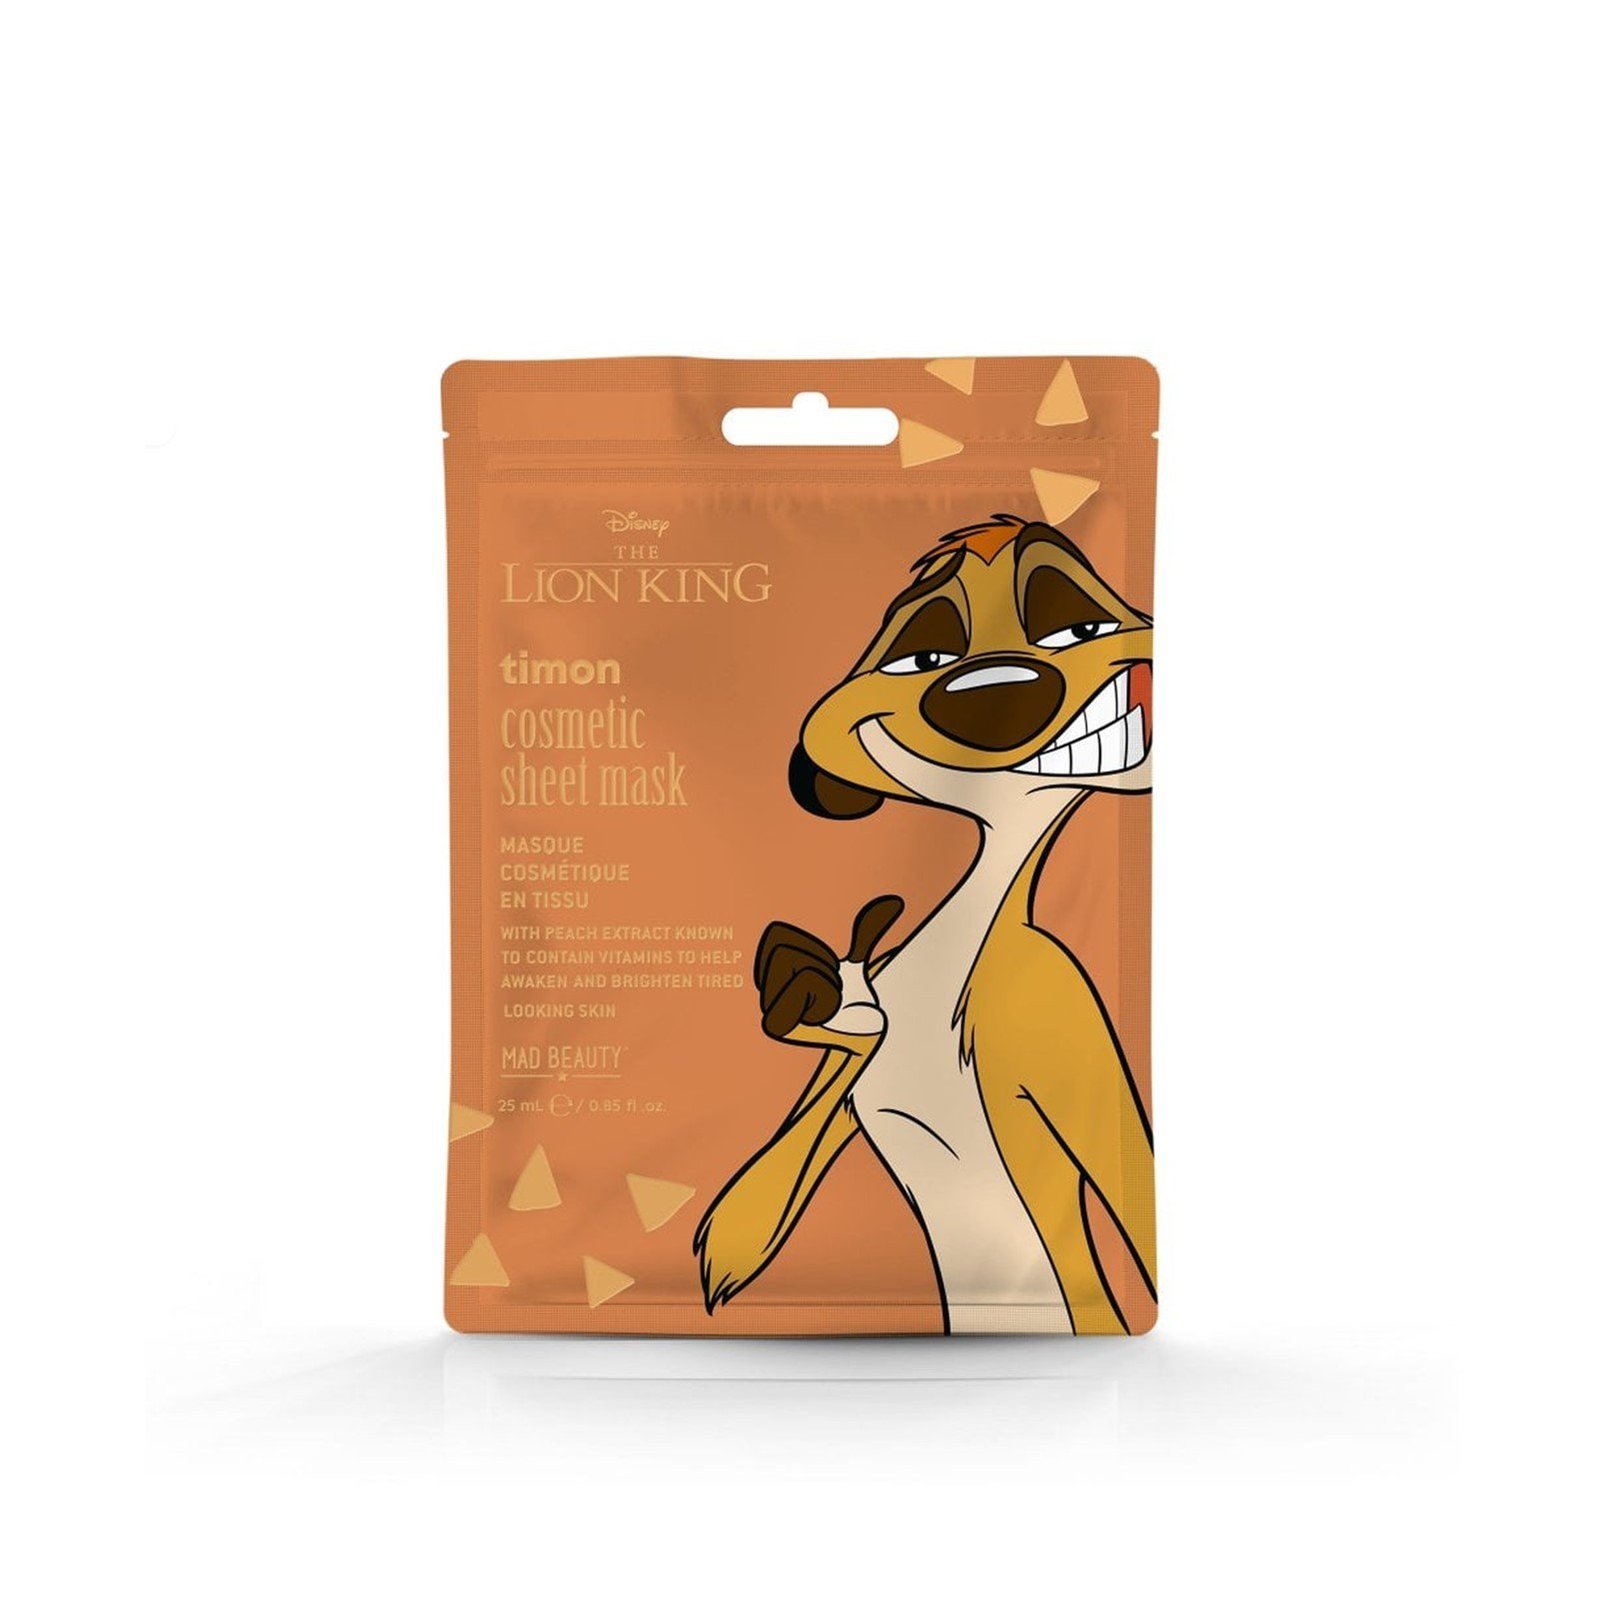 Mad Beauty Disney The Lion King Cosmetic Sheet Mask Timon 25ml